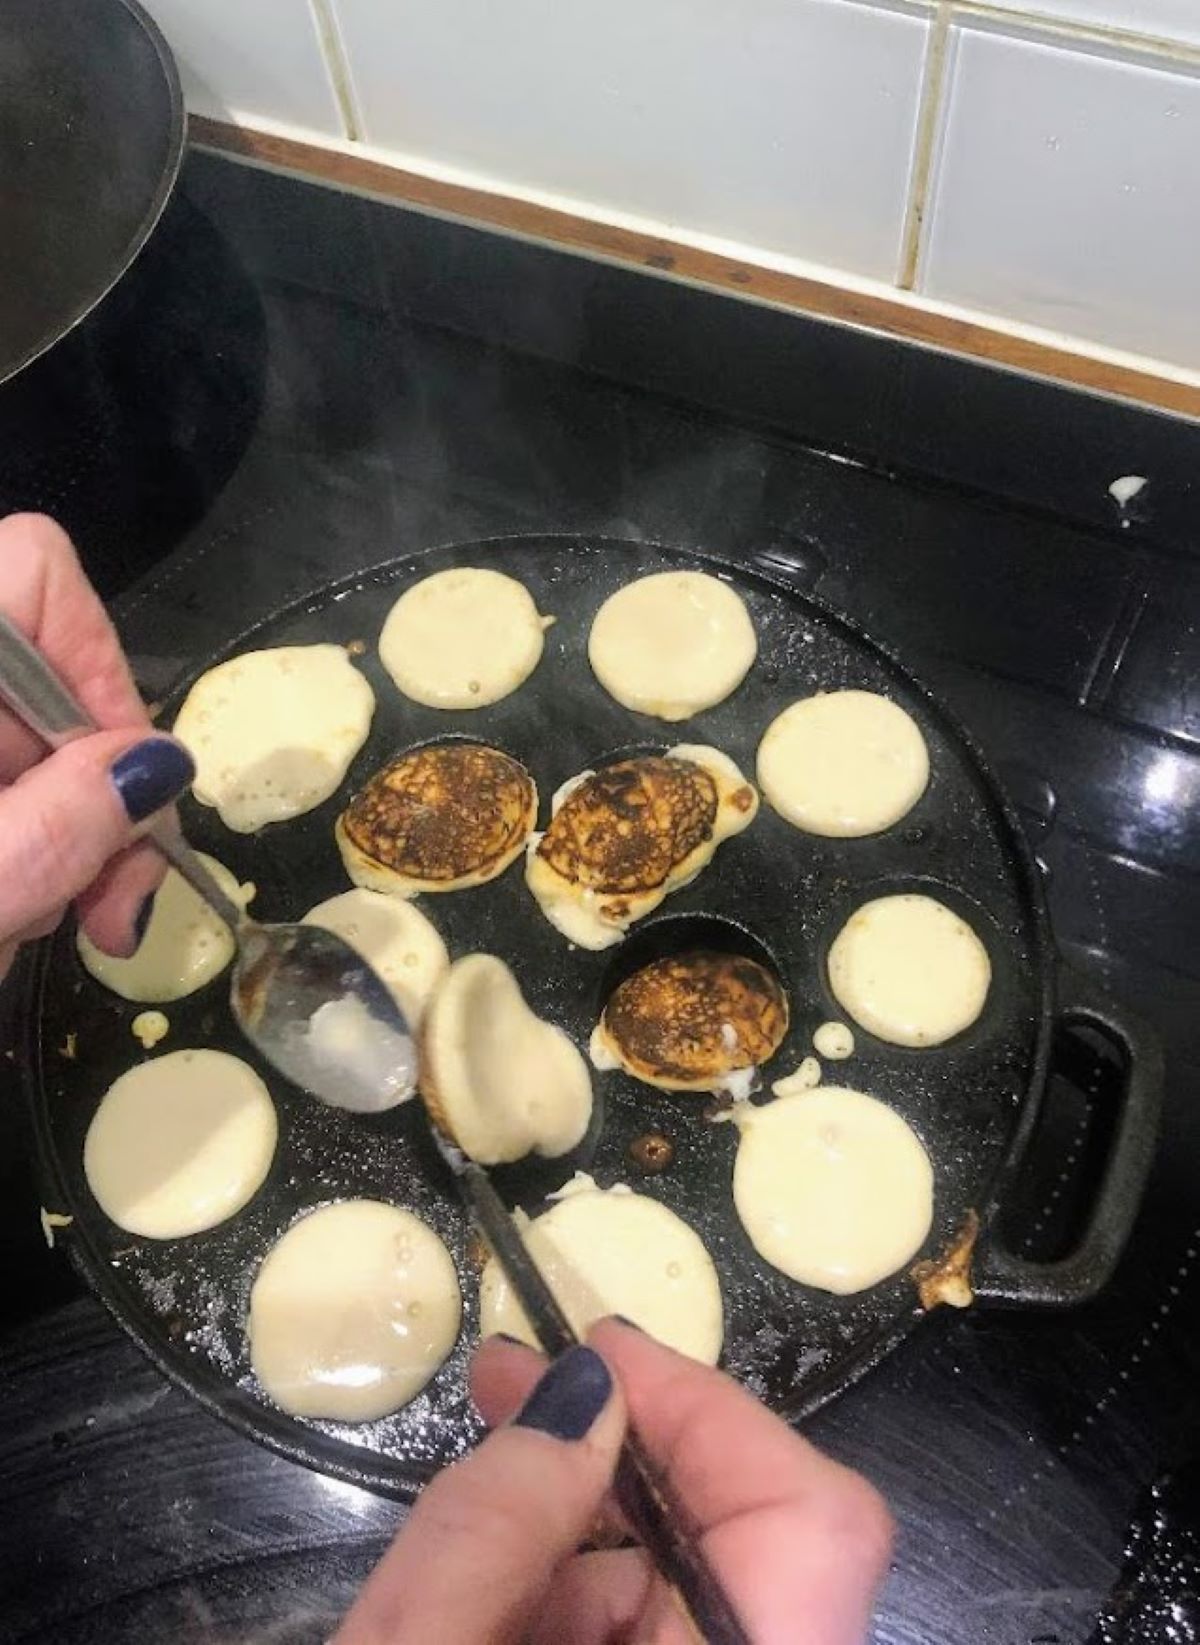 poffertjes being flipped over